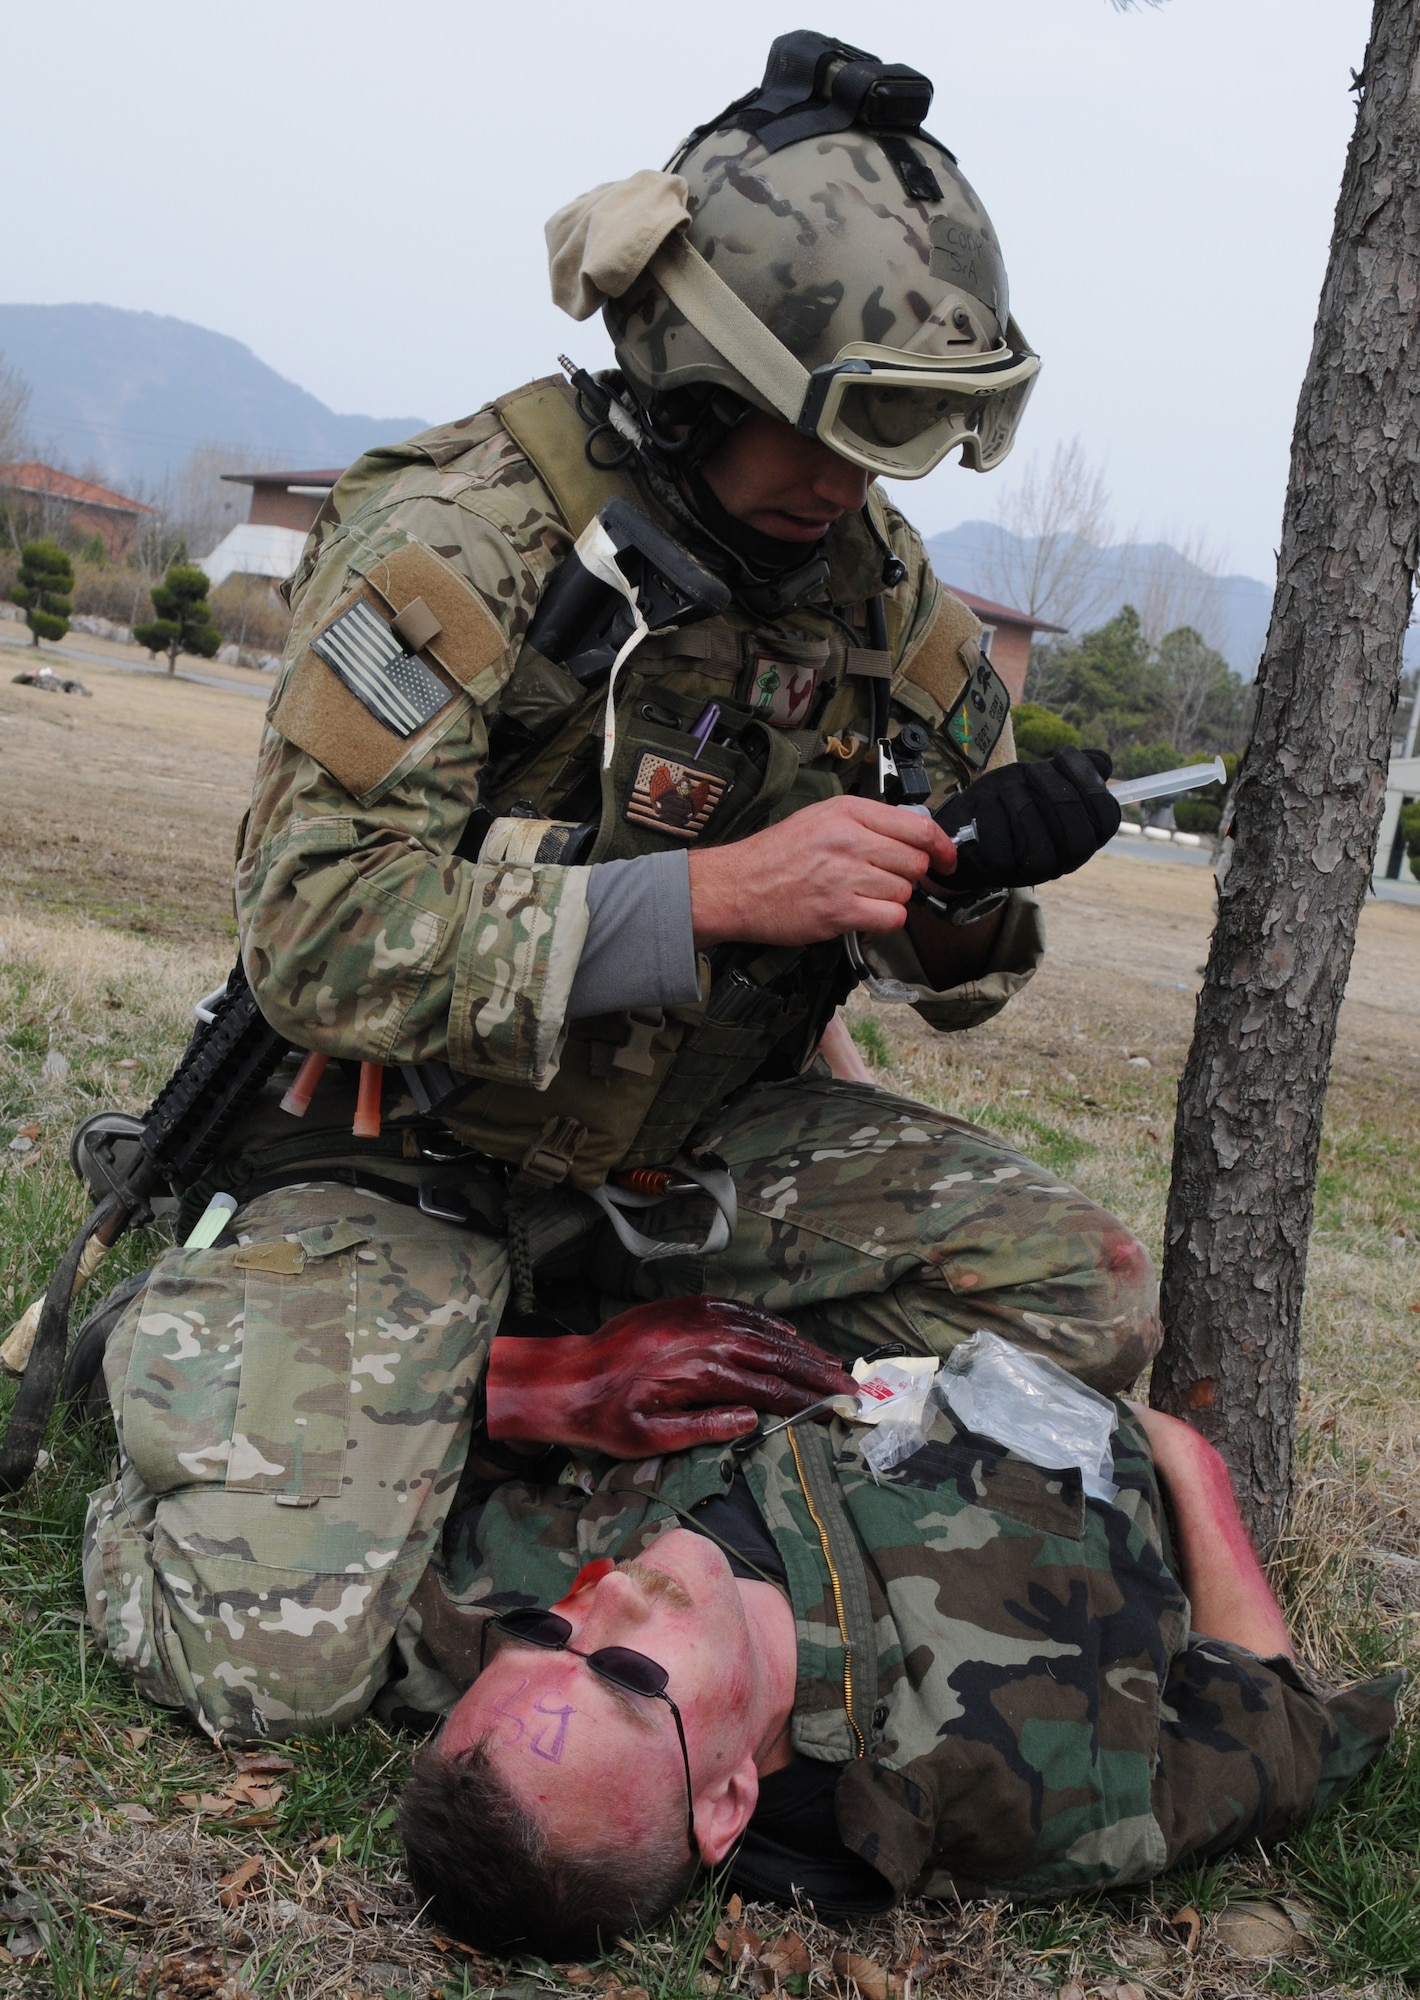 DAEGU AIR BASE, Republic of Korea -- Senior Airman Cody Cerny, a pararescueman from the 320th Special Tactics Squadron, prepares to insert a tube into the neck of a simulated wounded soldier to open an airway during a mass casualty exercise here March 27. The scenario is part of the 353rd Special Operations Group’s annual operational readiness exercise. (U.S. Air Force photo by Tech. Sgt. Aaron Cram)